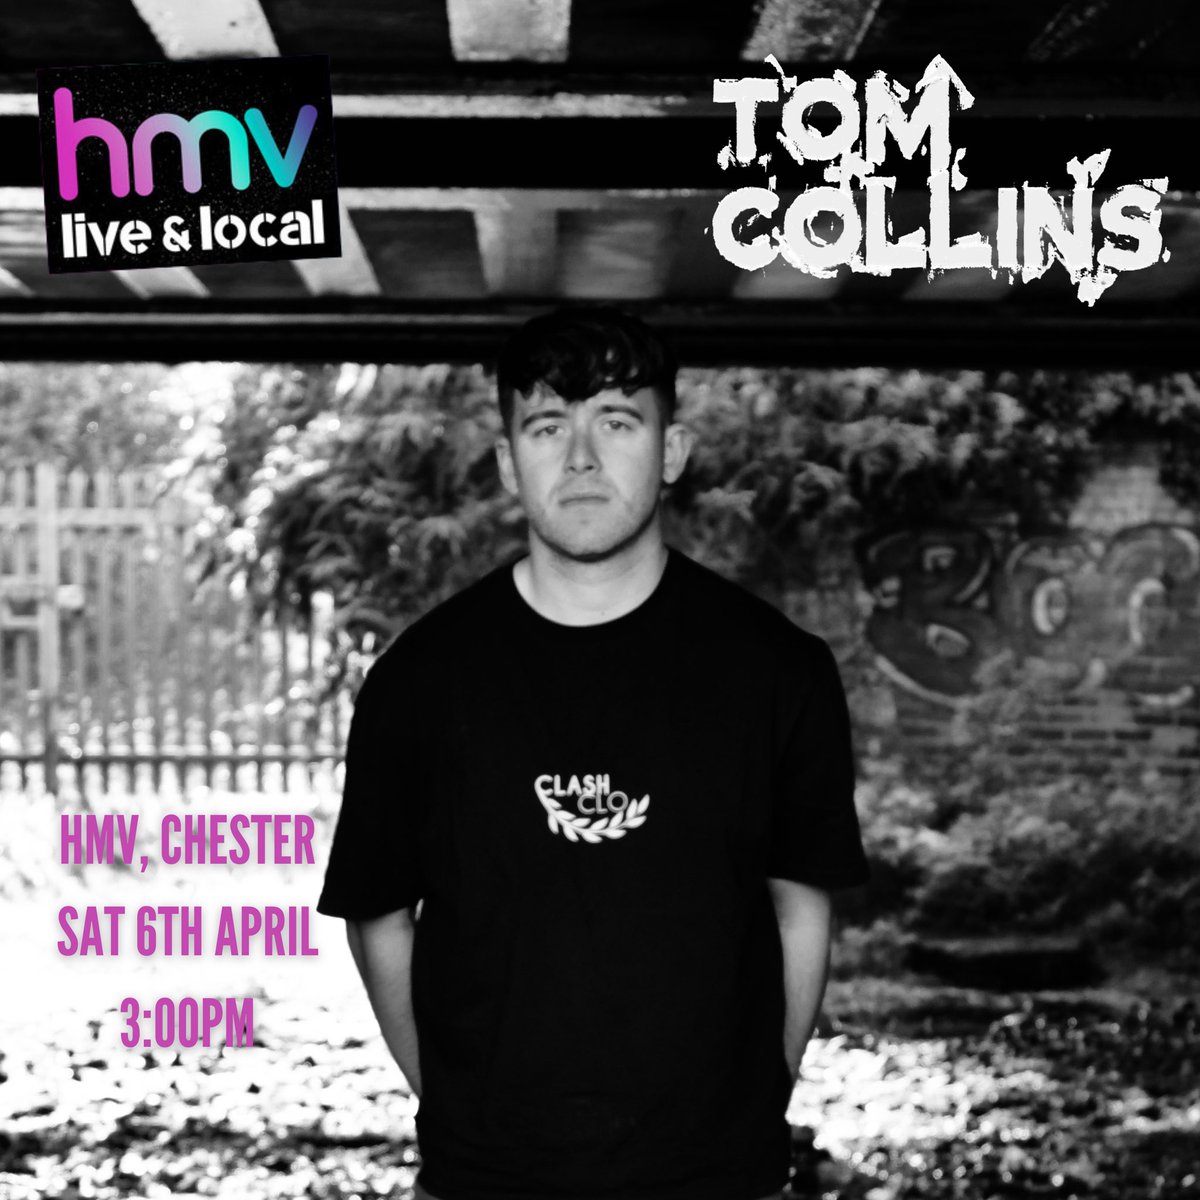 Playing an acoustic set at @hmvChester this afternoon from 3pm. I’ll be selling my tees and playing my new tune - so come on down and say hello x Free entry👊🏻